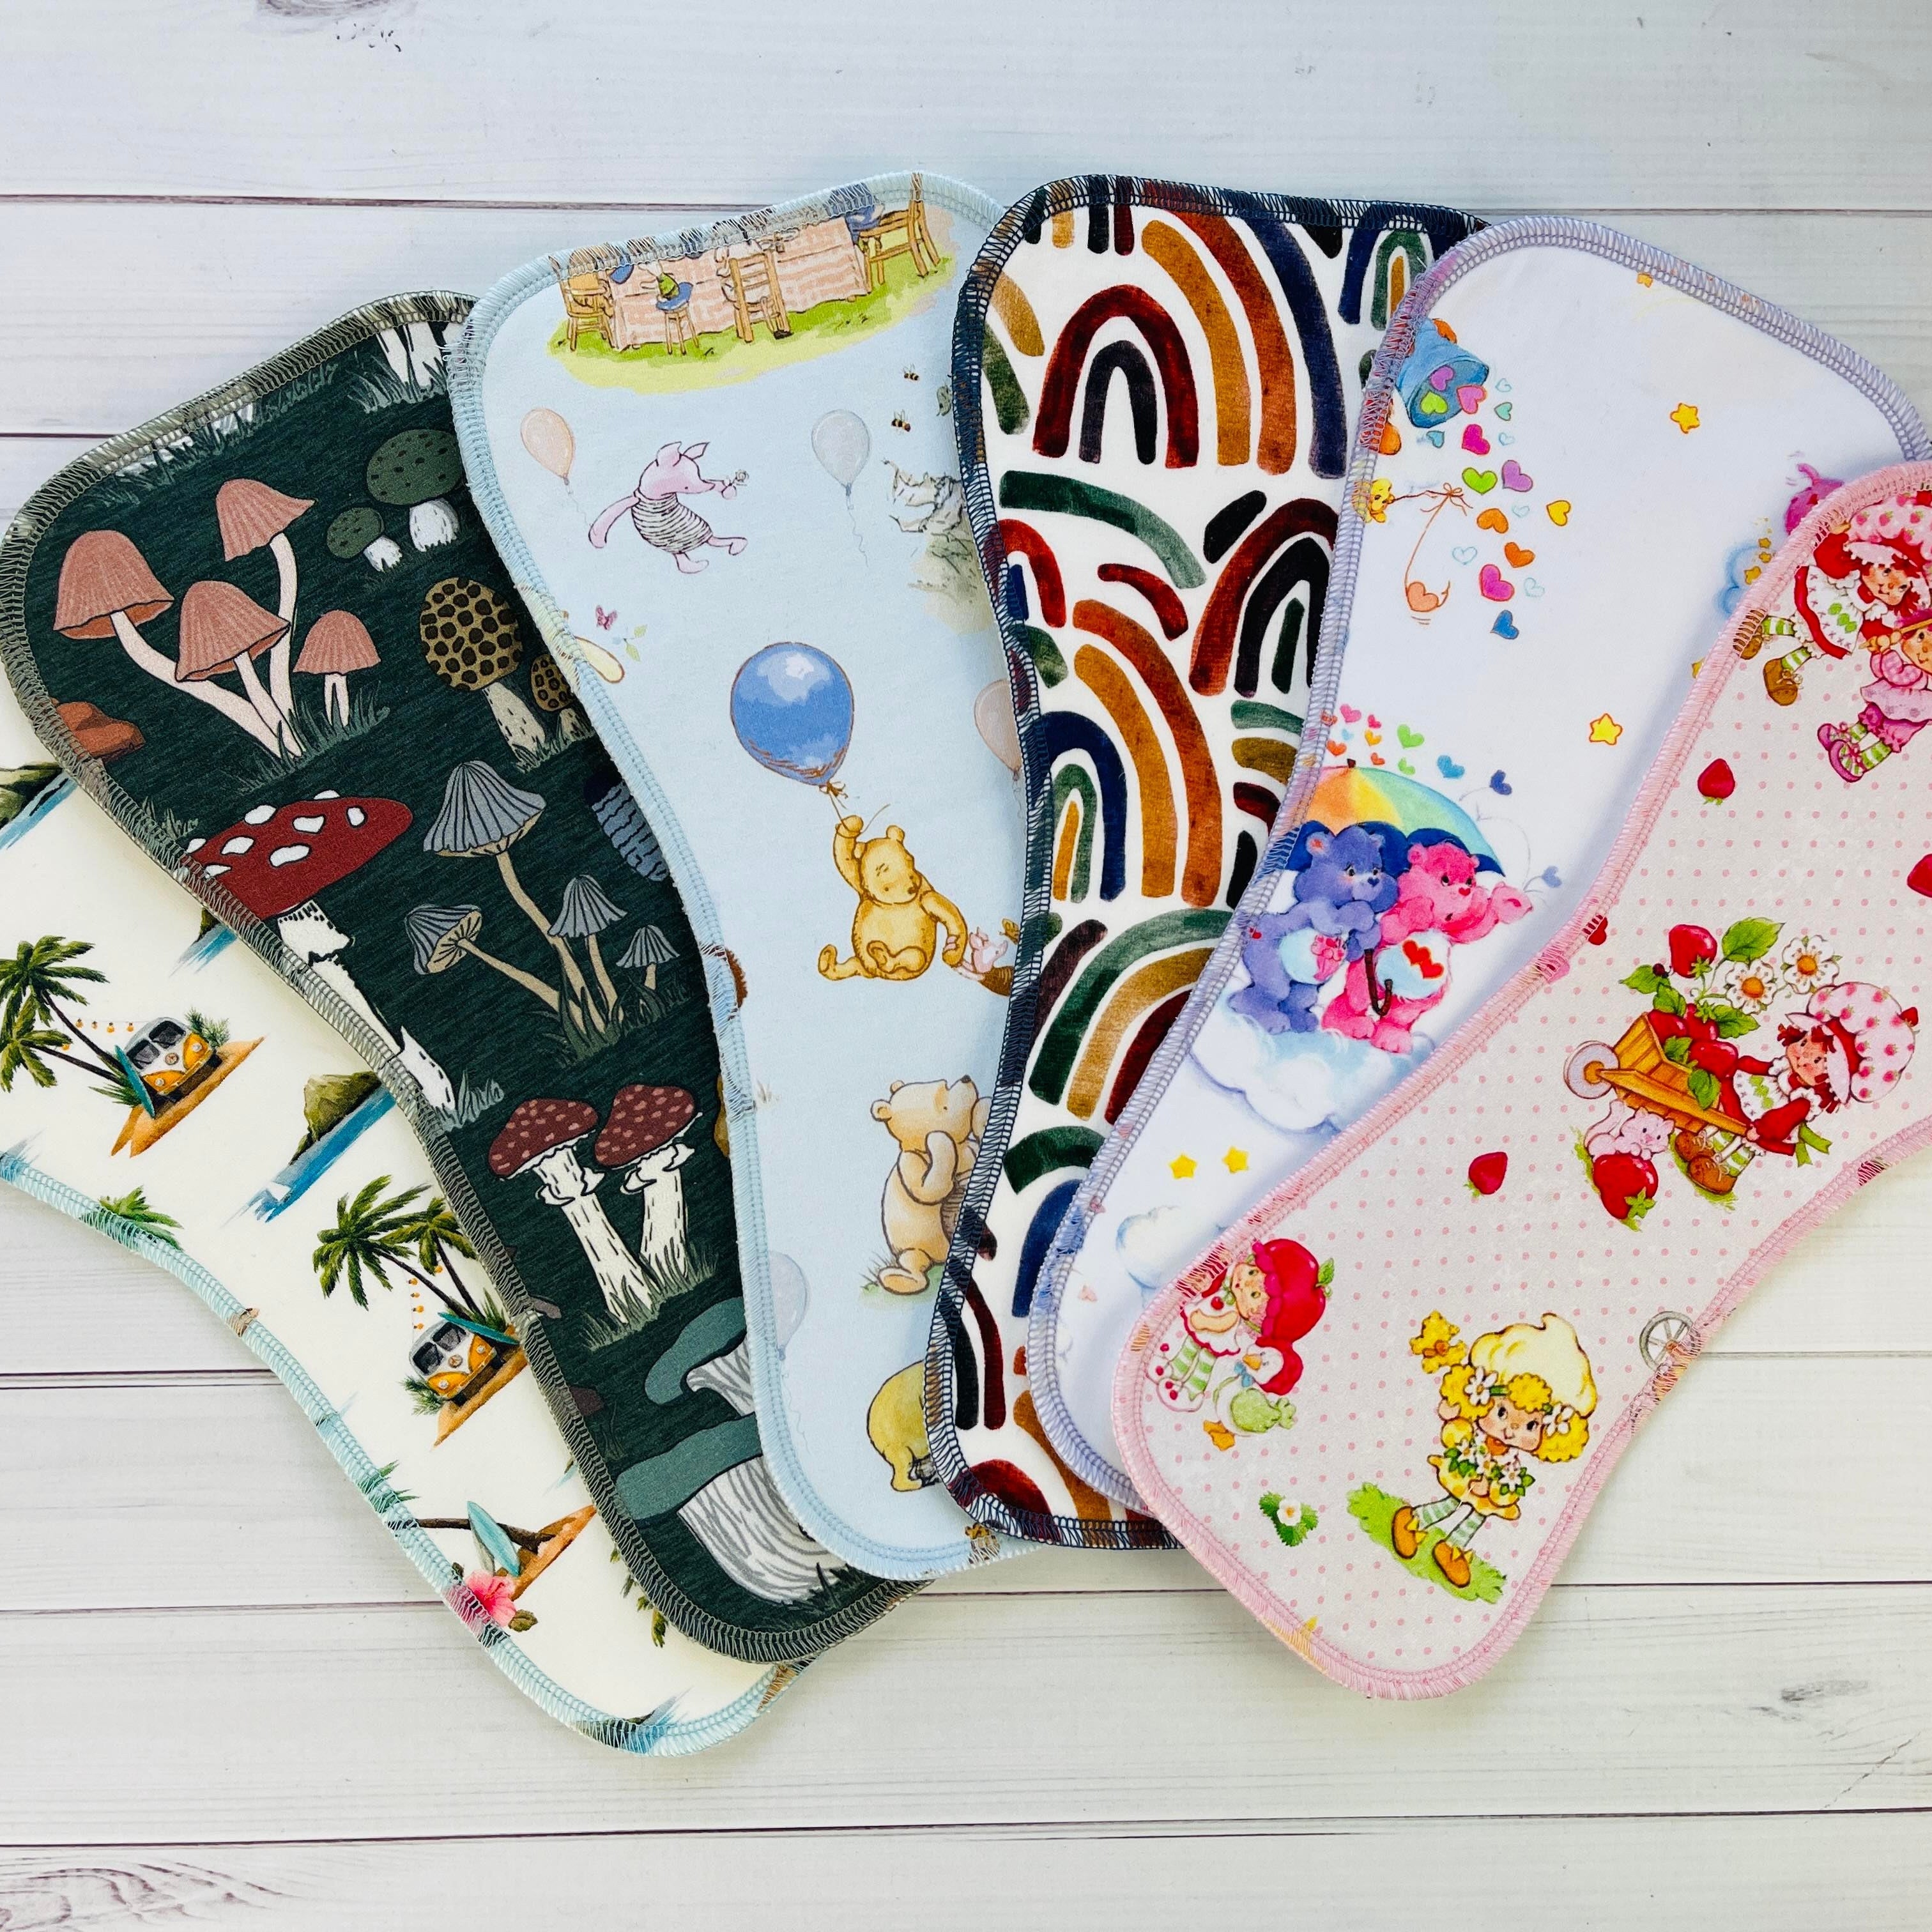 Lilly & Frank Flat Cloth Diaper Regular Size Booster One Size Contour Flat - *New Insert*